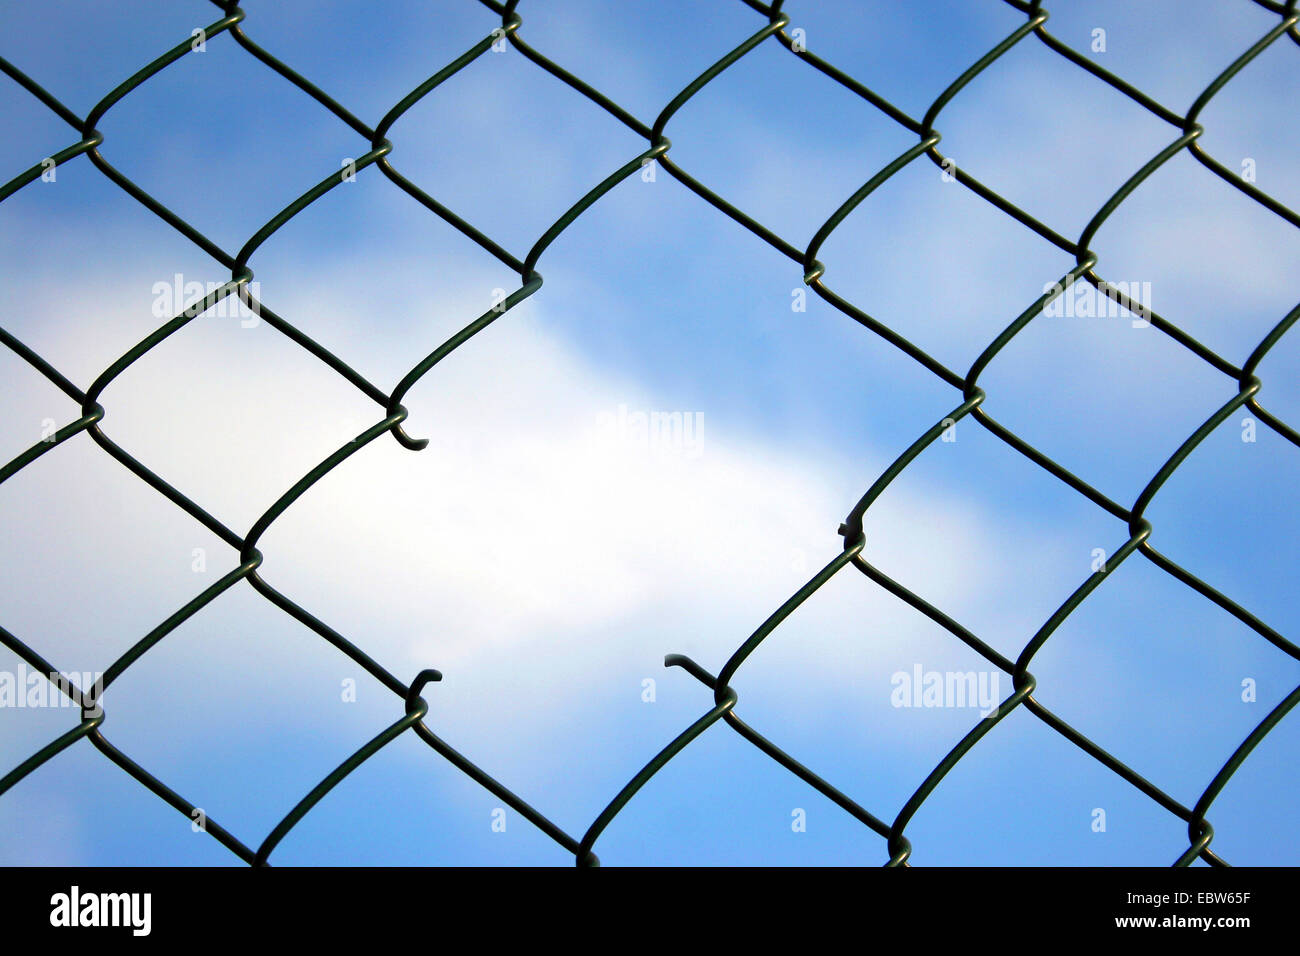 a hole in the wire mesh Stock Photo